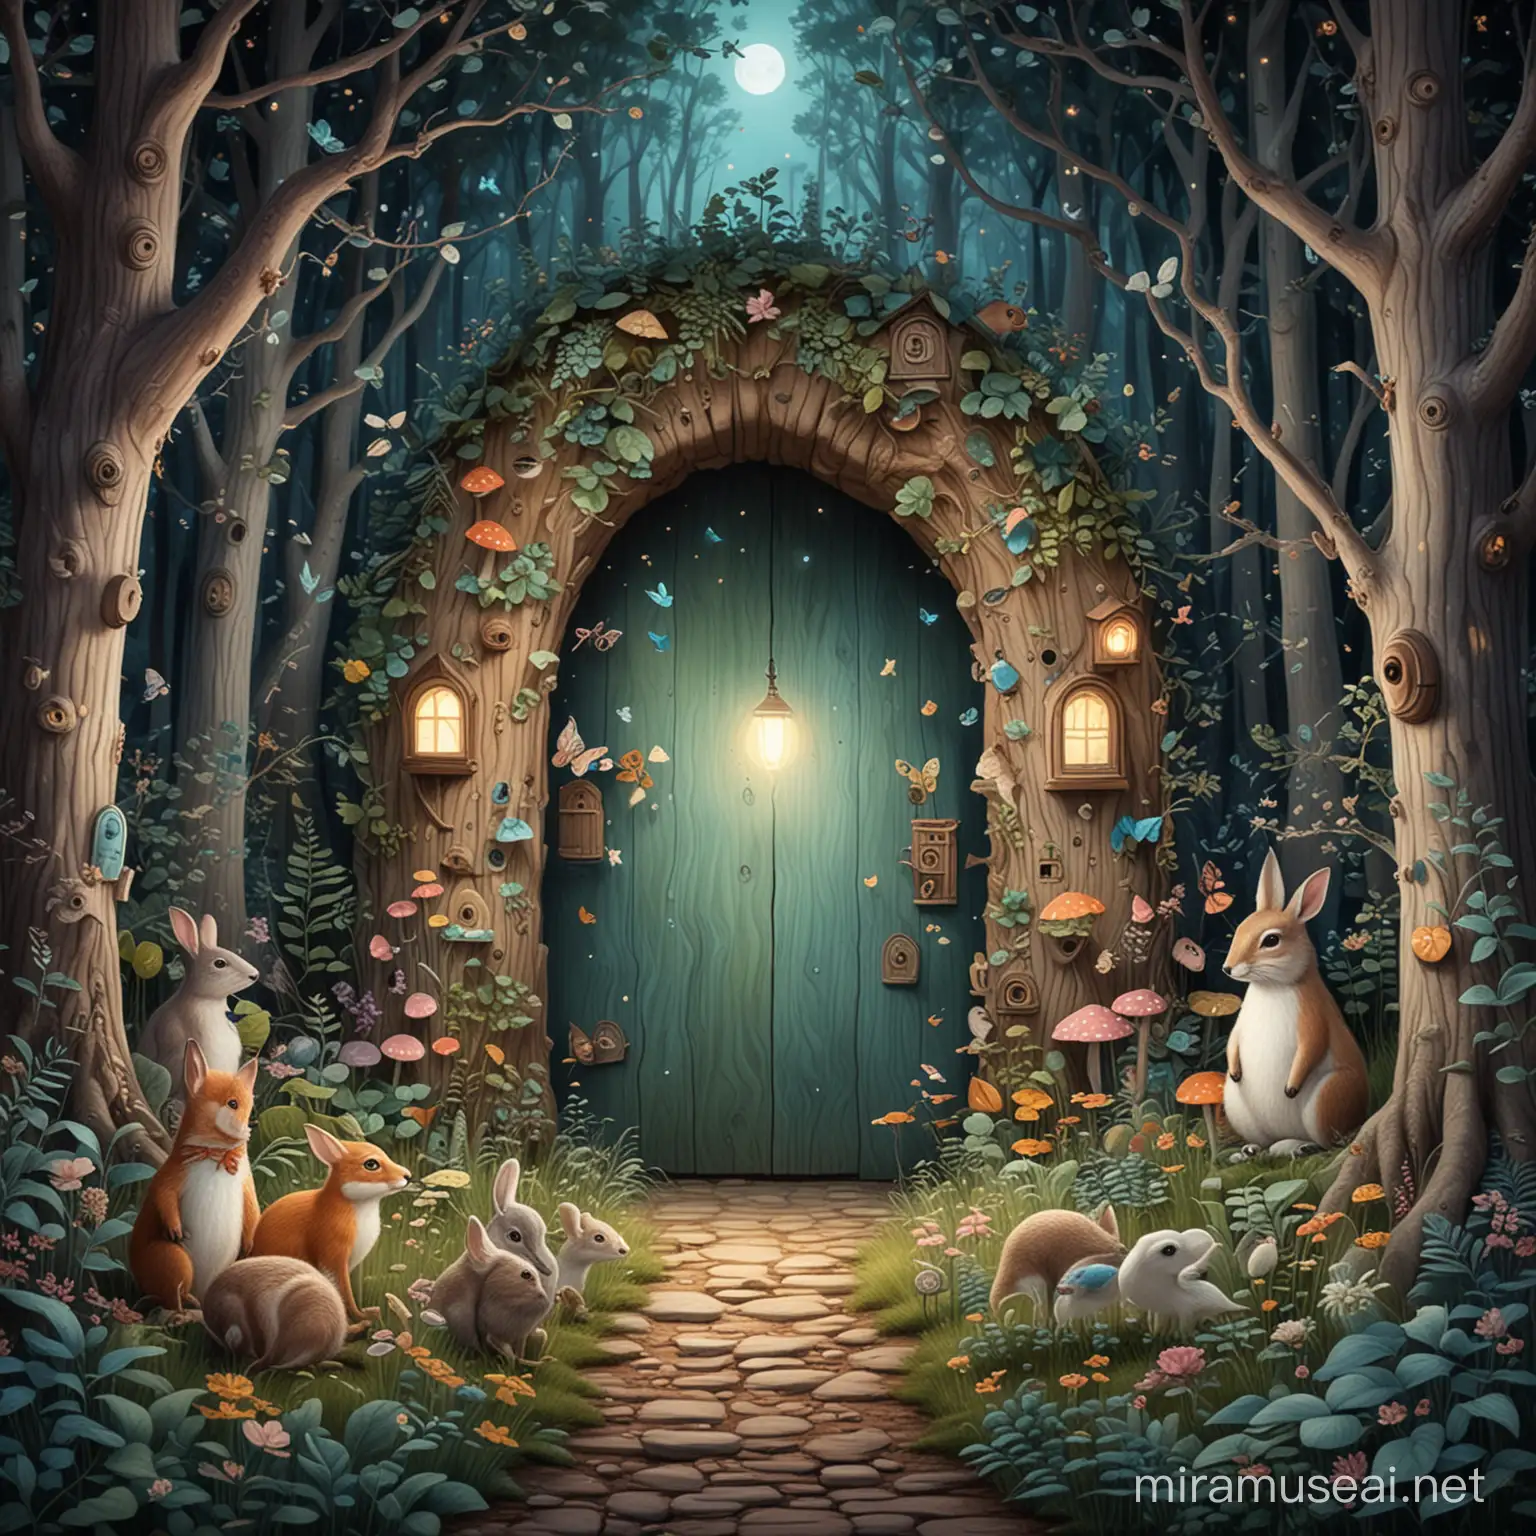 A whimsical forest filled with talking animals, hidden doorways, and trees that come to life at night. Whimsical art, soft colors